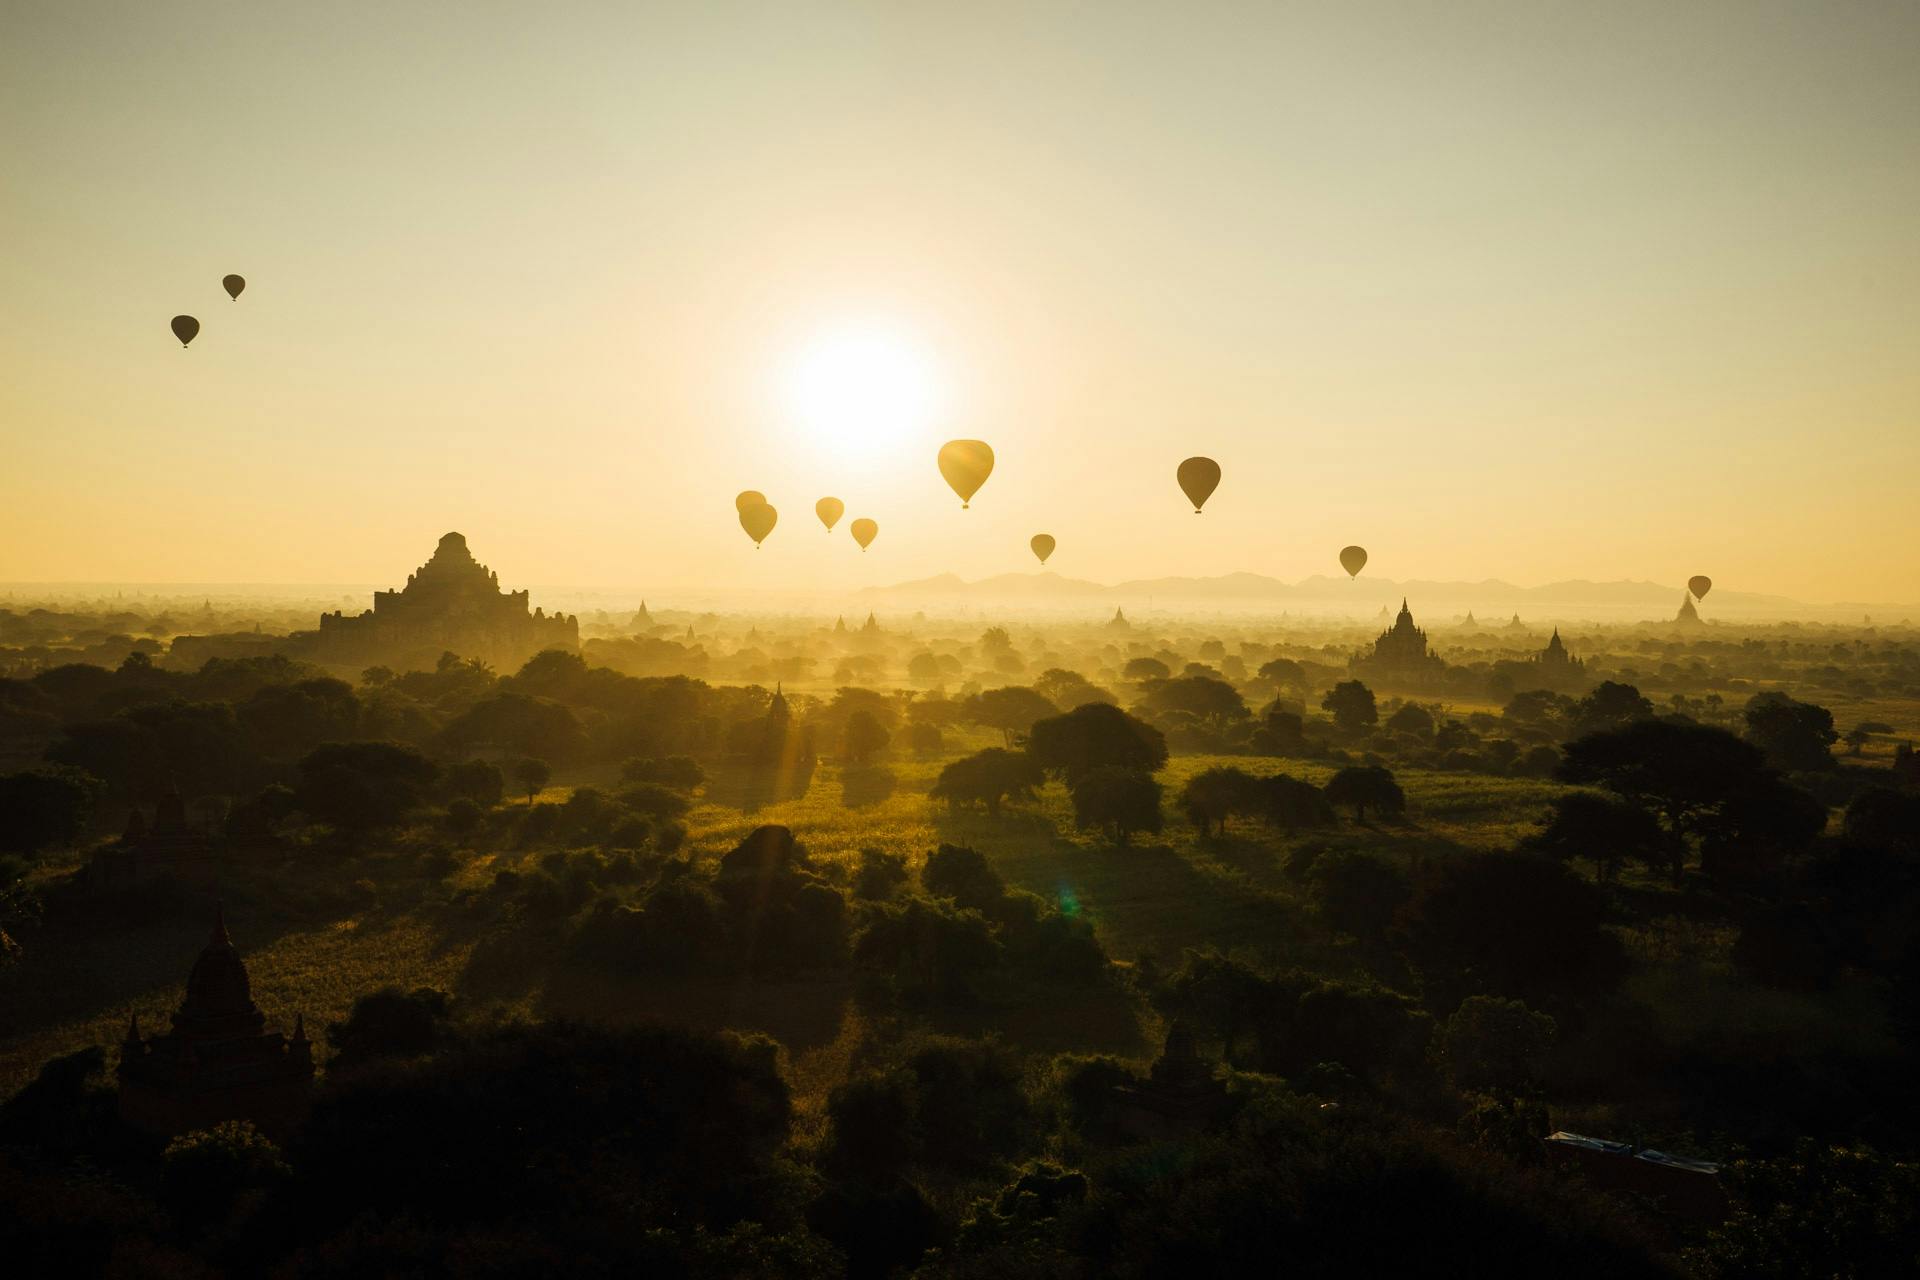 a group of hot air balloons flying in the sky, unsplash contest winner, myanmar, sun behind her, historical photo, 15081959 21121991 01012000 4k